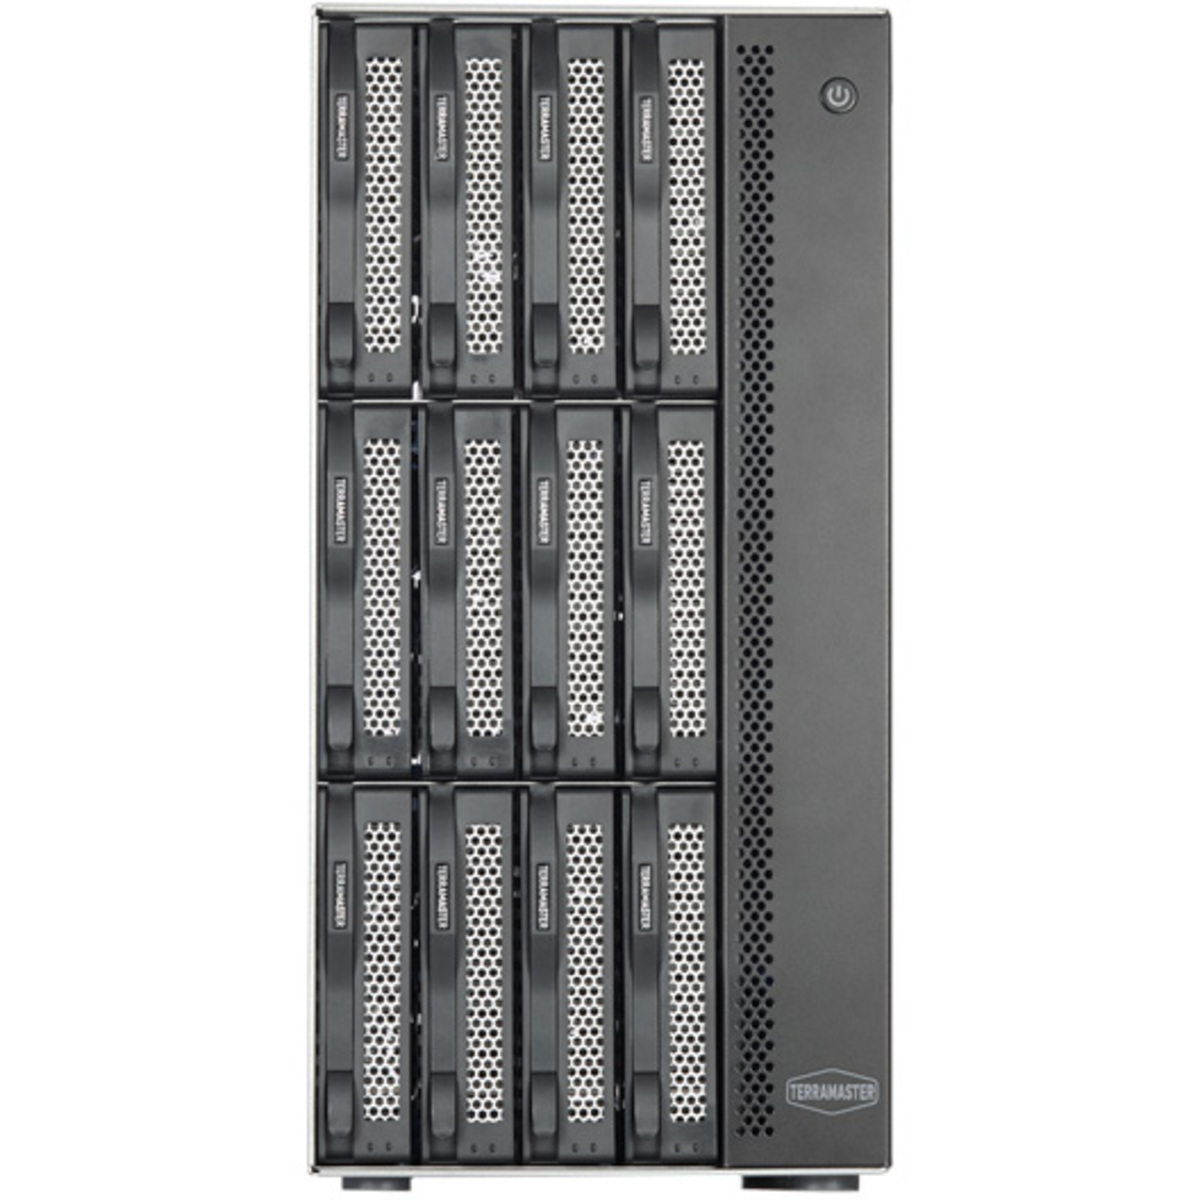 TerraMaster T12-423 132tb 12-Bay Desktop Multimedia / Power User / Business NAS - Network Attached Storage Device 11x12tb Toshiba Enterprise Capacity MG07ACA12TE 3.5 7200rpm SATA 6Gb/s HDD ENTERPRISE Class Drives Installed - Burn-In Tested T12-423